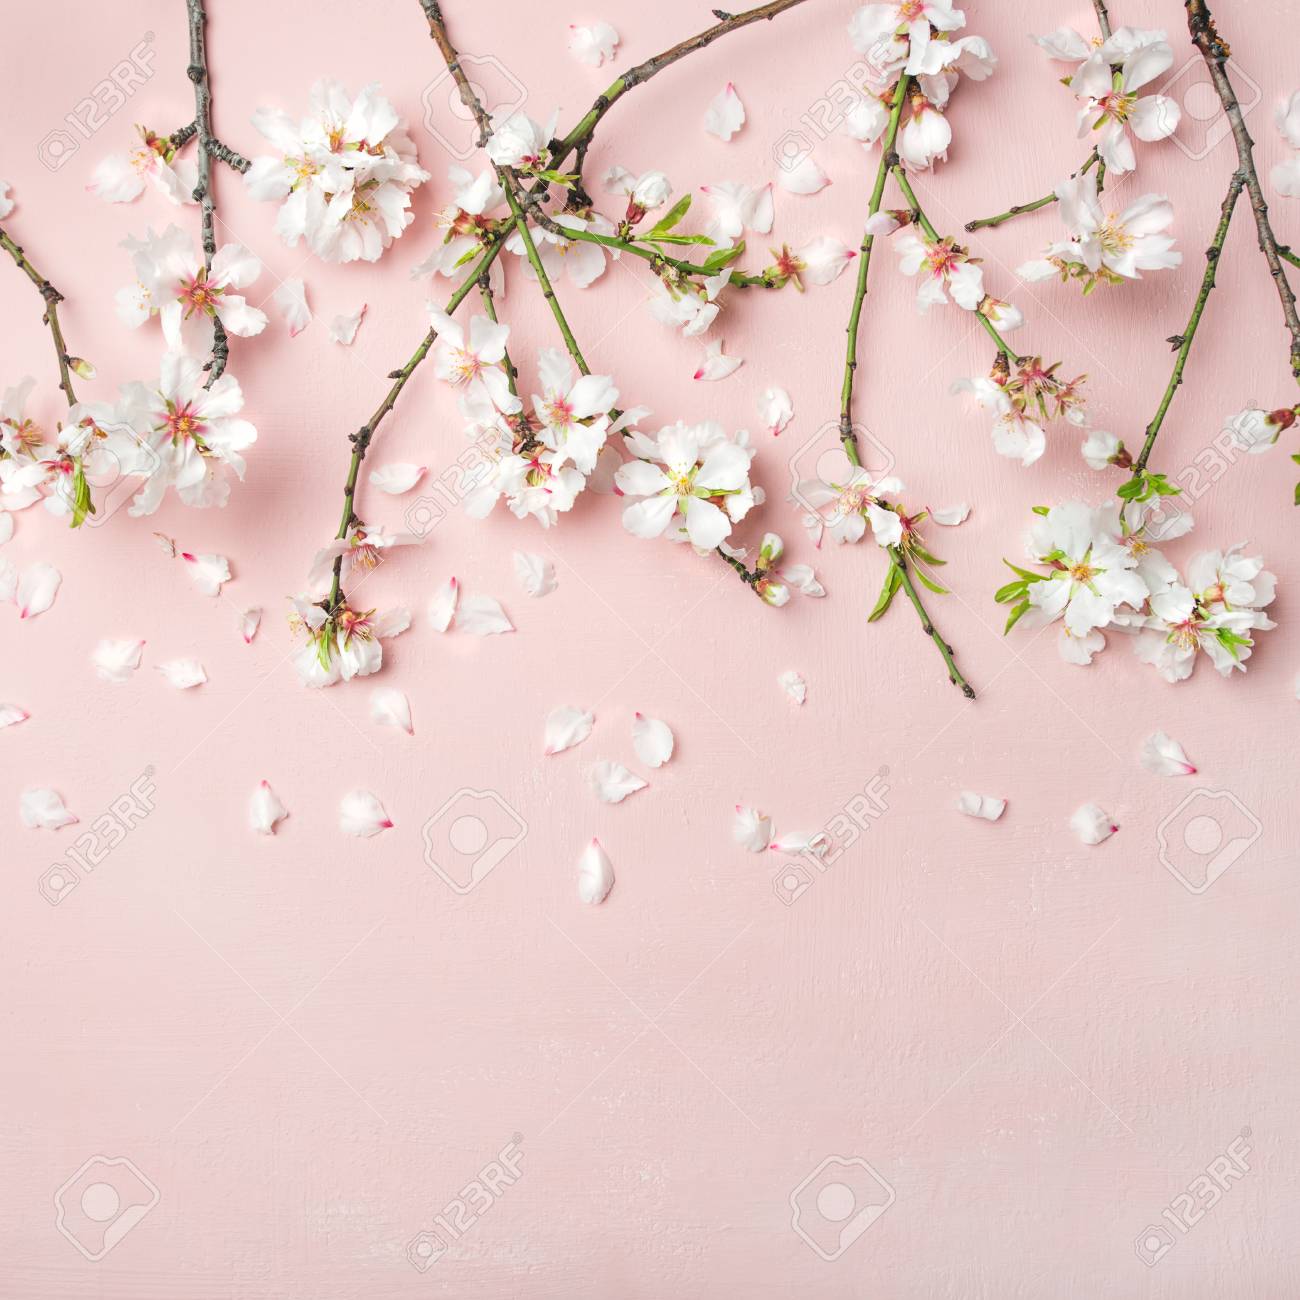 Spring Floral Background Texture Wallpaper Flat Lay Of White